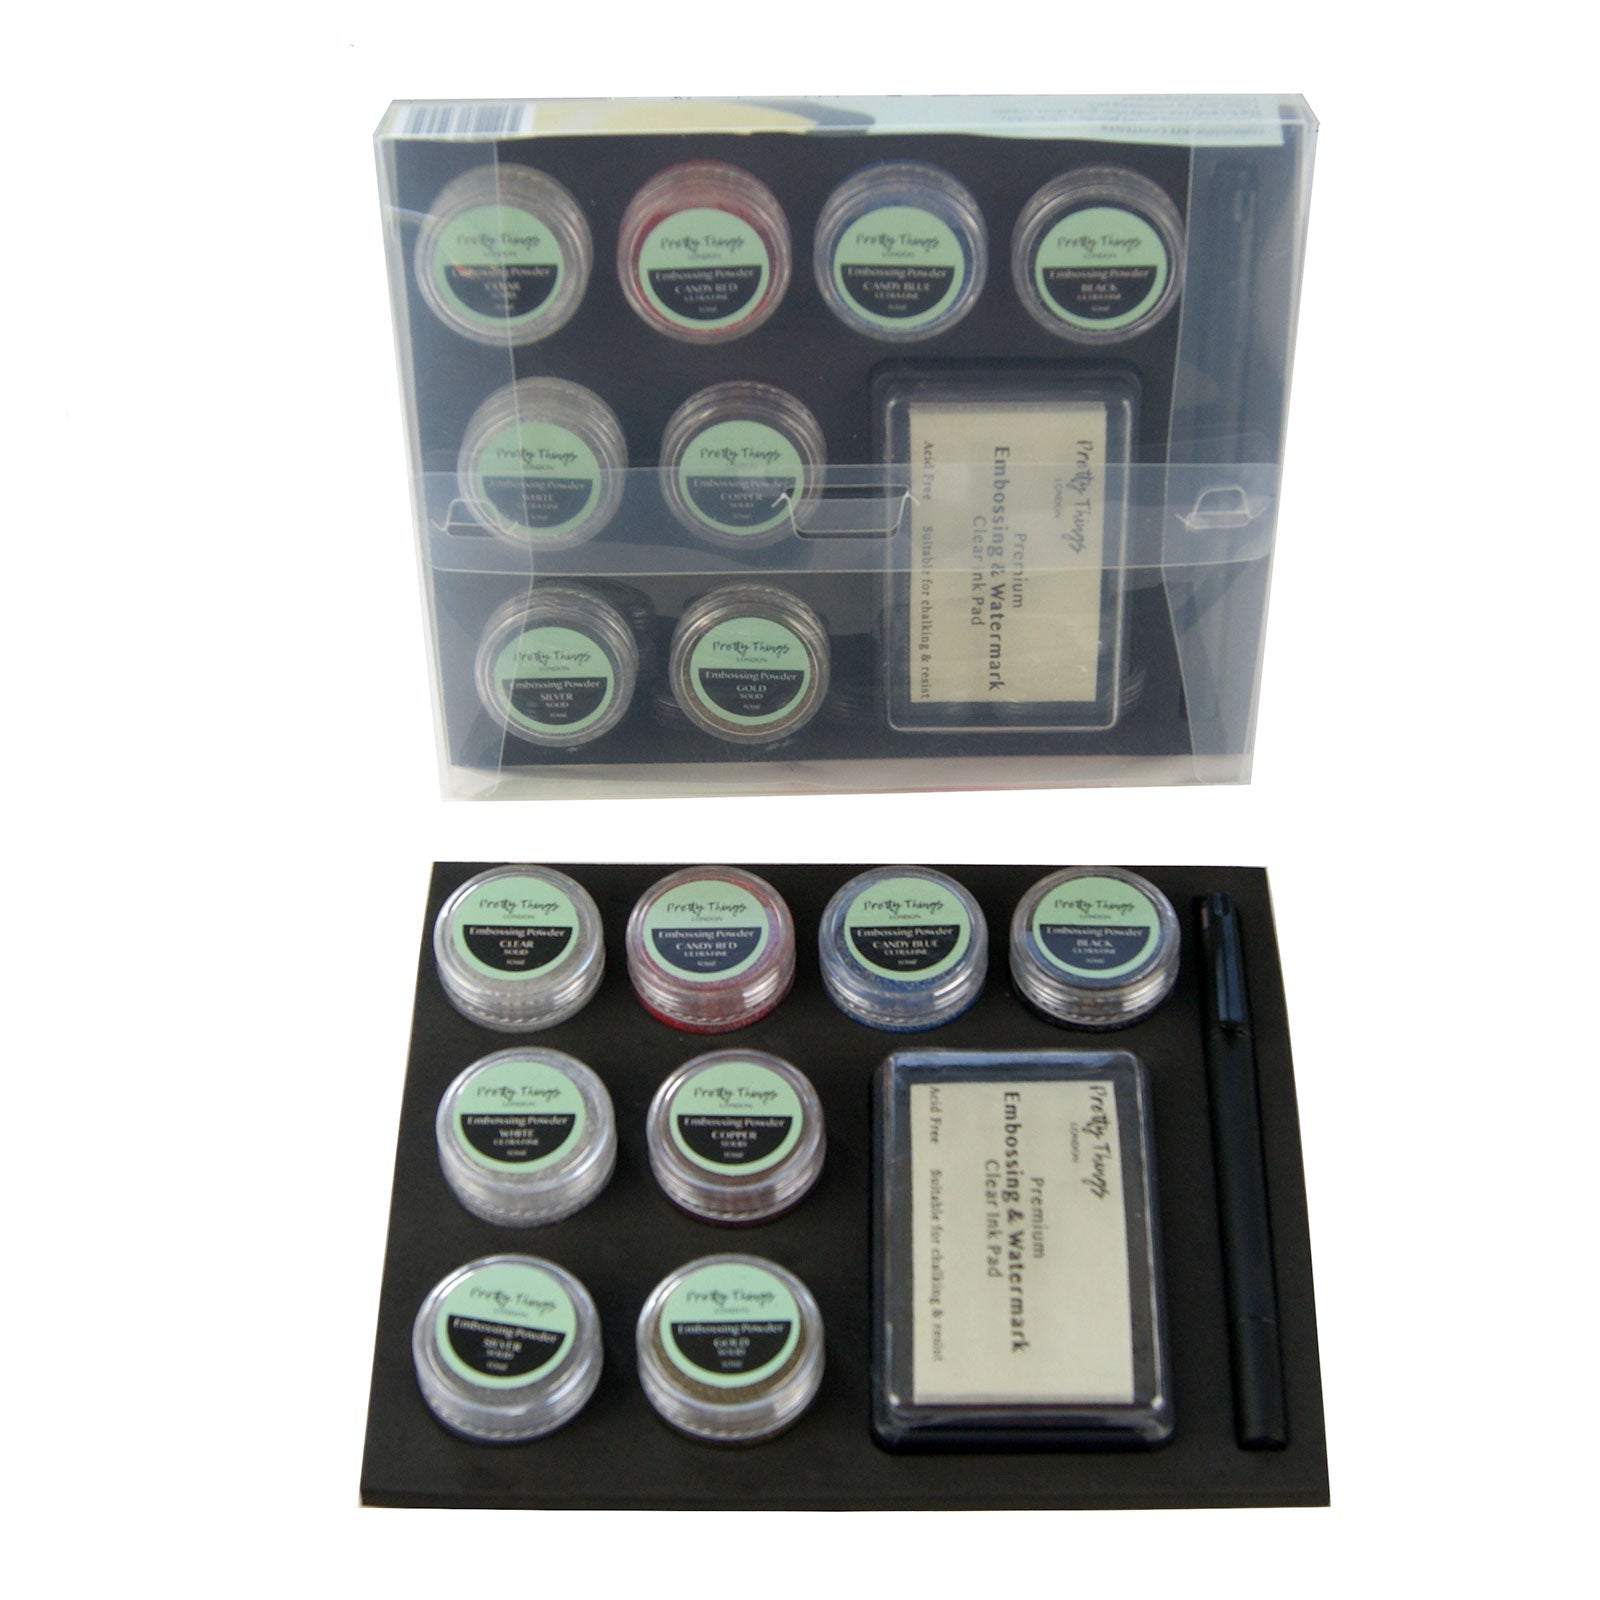 Embossing powder set: Includes 8 colours, 1 clear stamp pad and 1 embossing pen